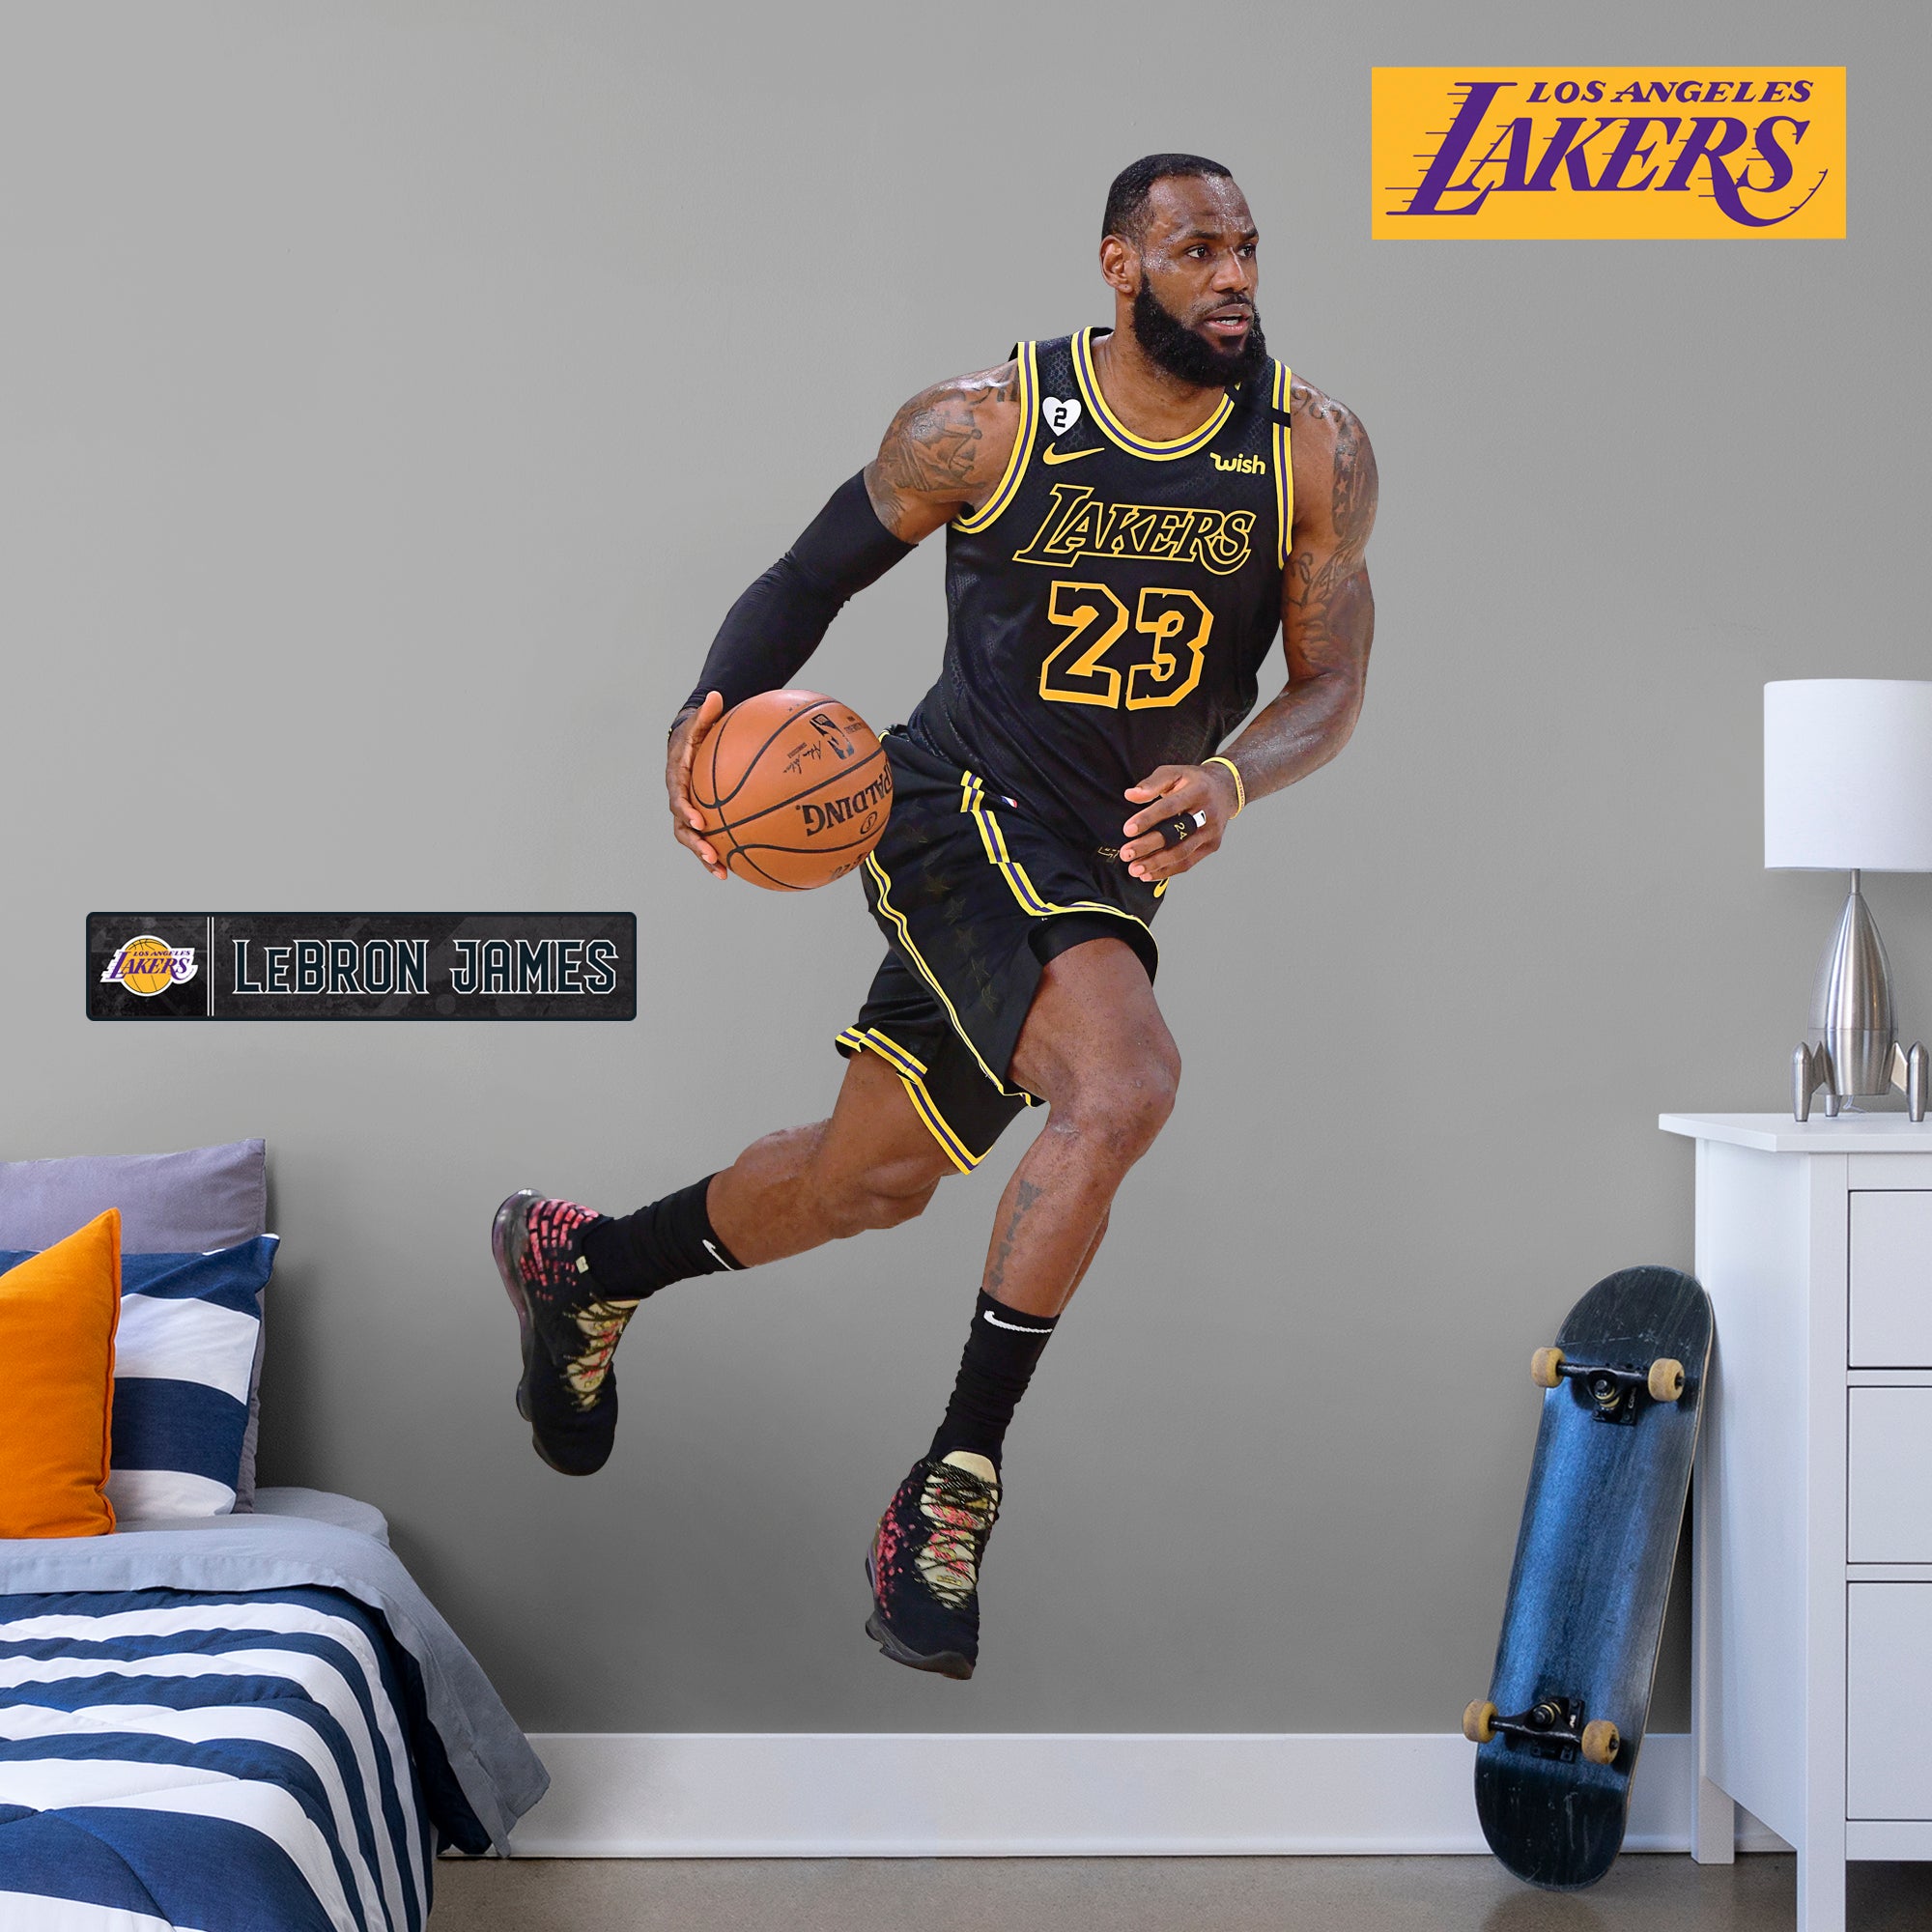 LeBron James for Los Angeles Lakers: Black Jersey - Officially Licensed NBA Removable Wall Decal Life-Size Athlete + 2 Decals (4